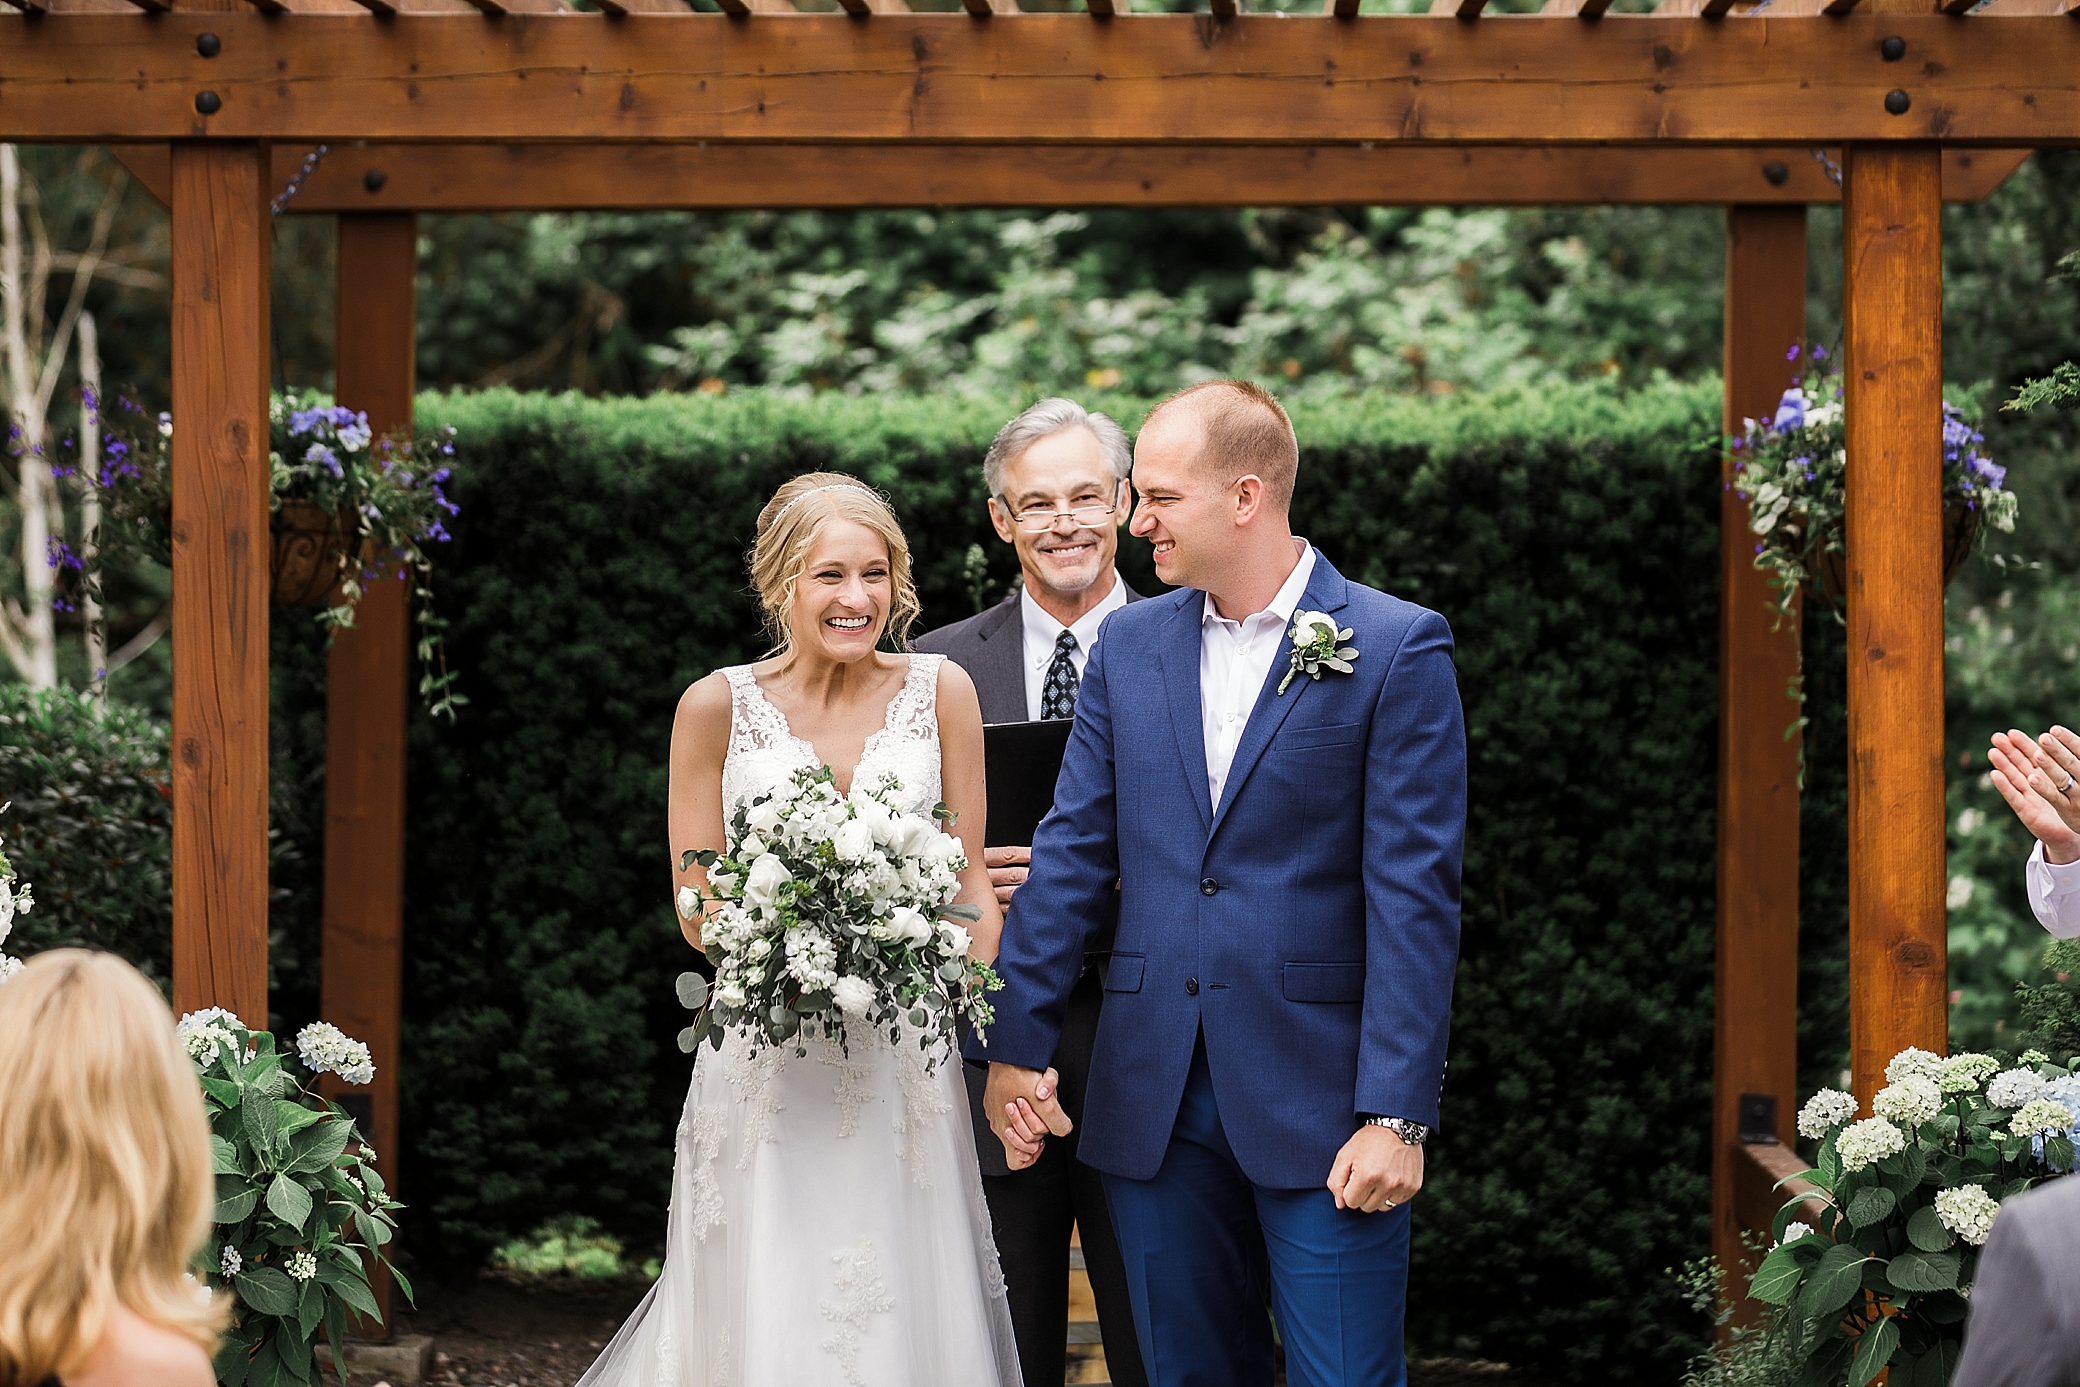 Bride and groom are married at Woodinville Wedding Venue, Willow Lodge | Megan Montalvo Photography 